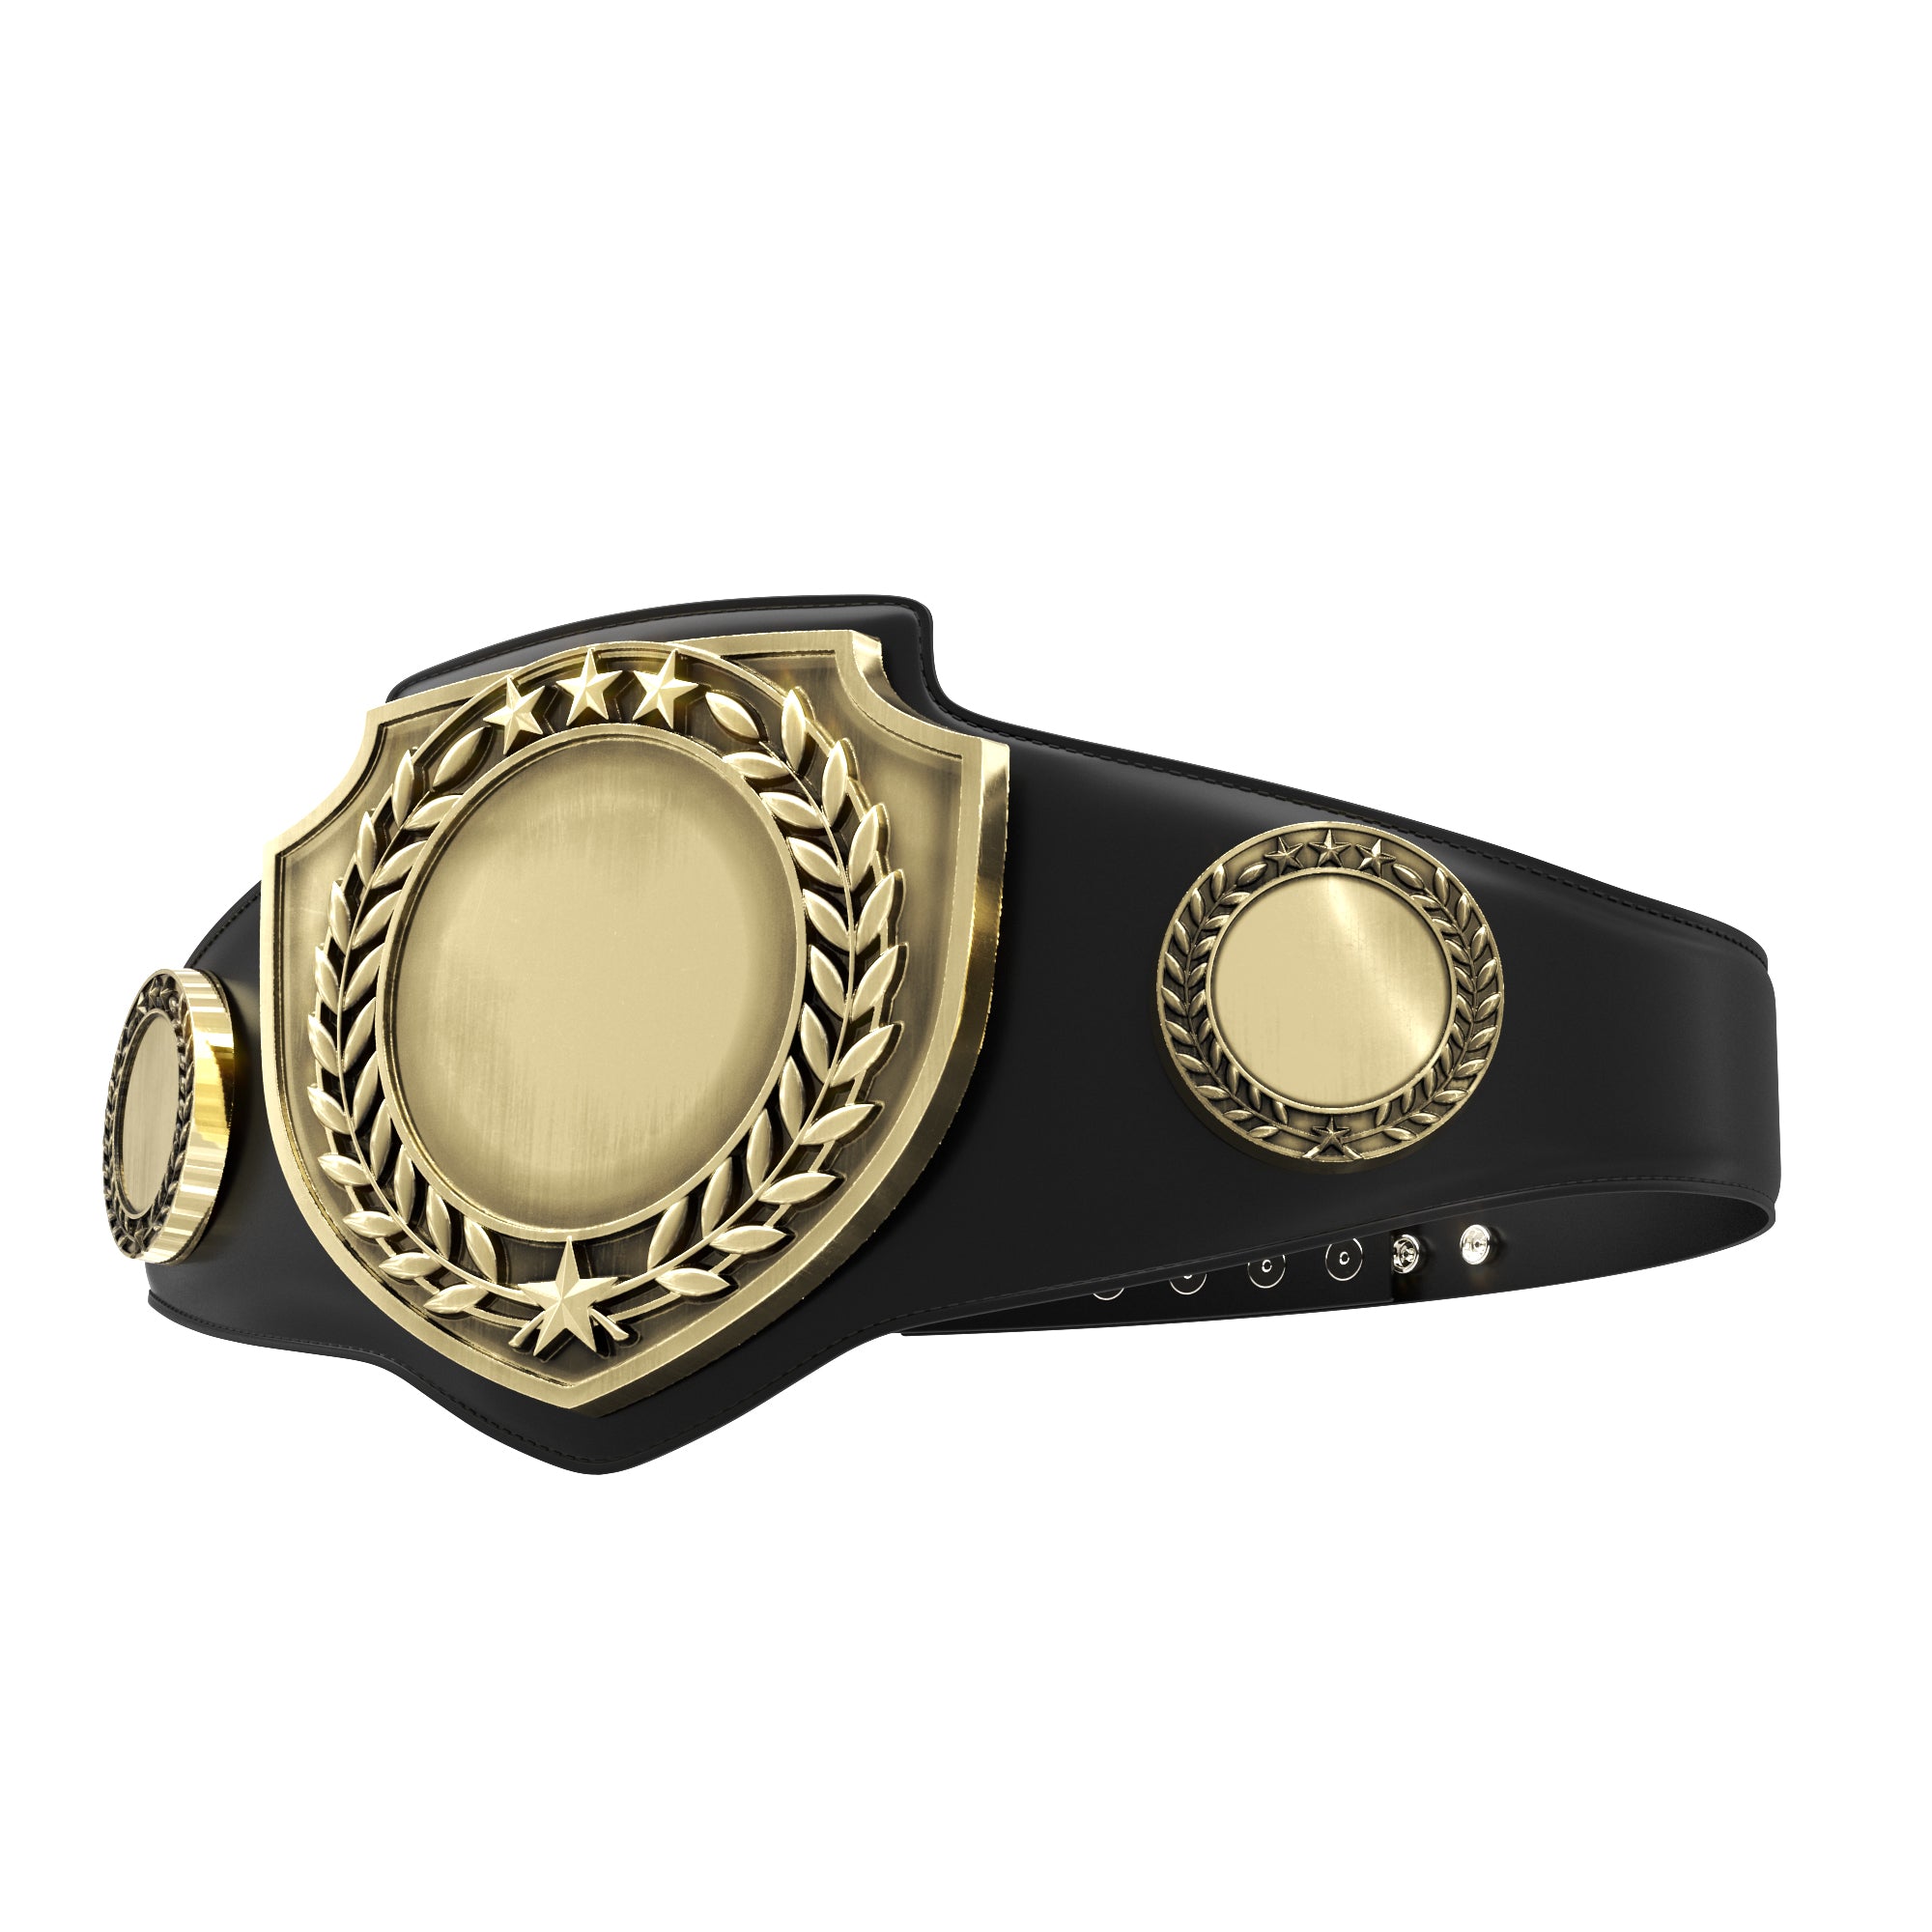 Black Belt with Gold Accents and Sublimated Discs